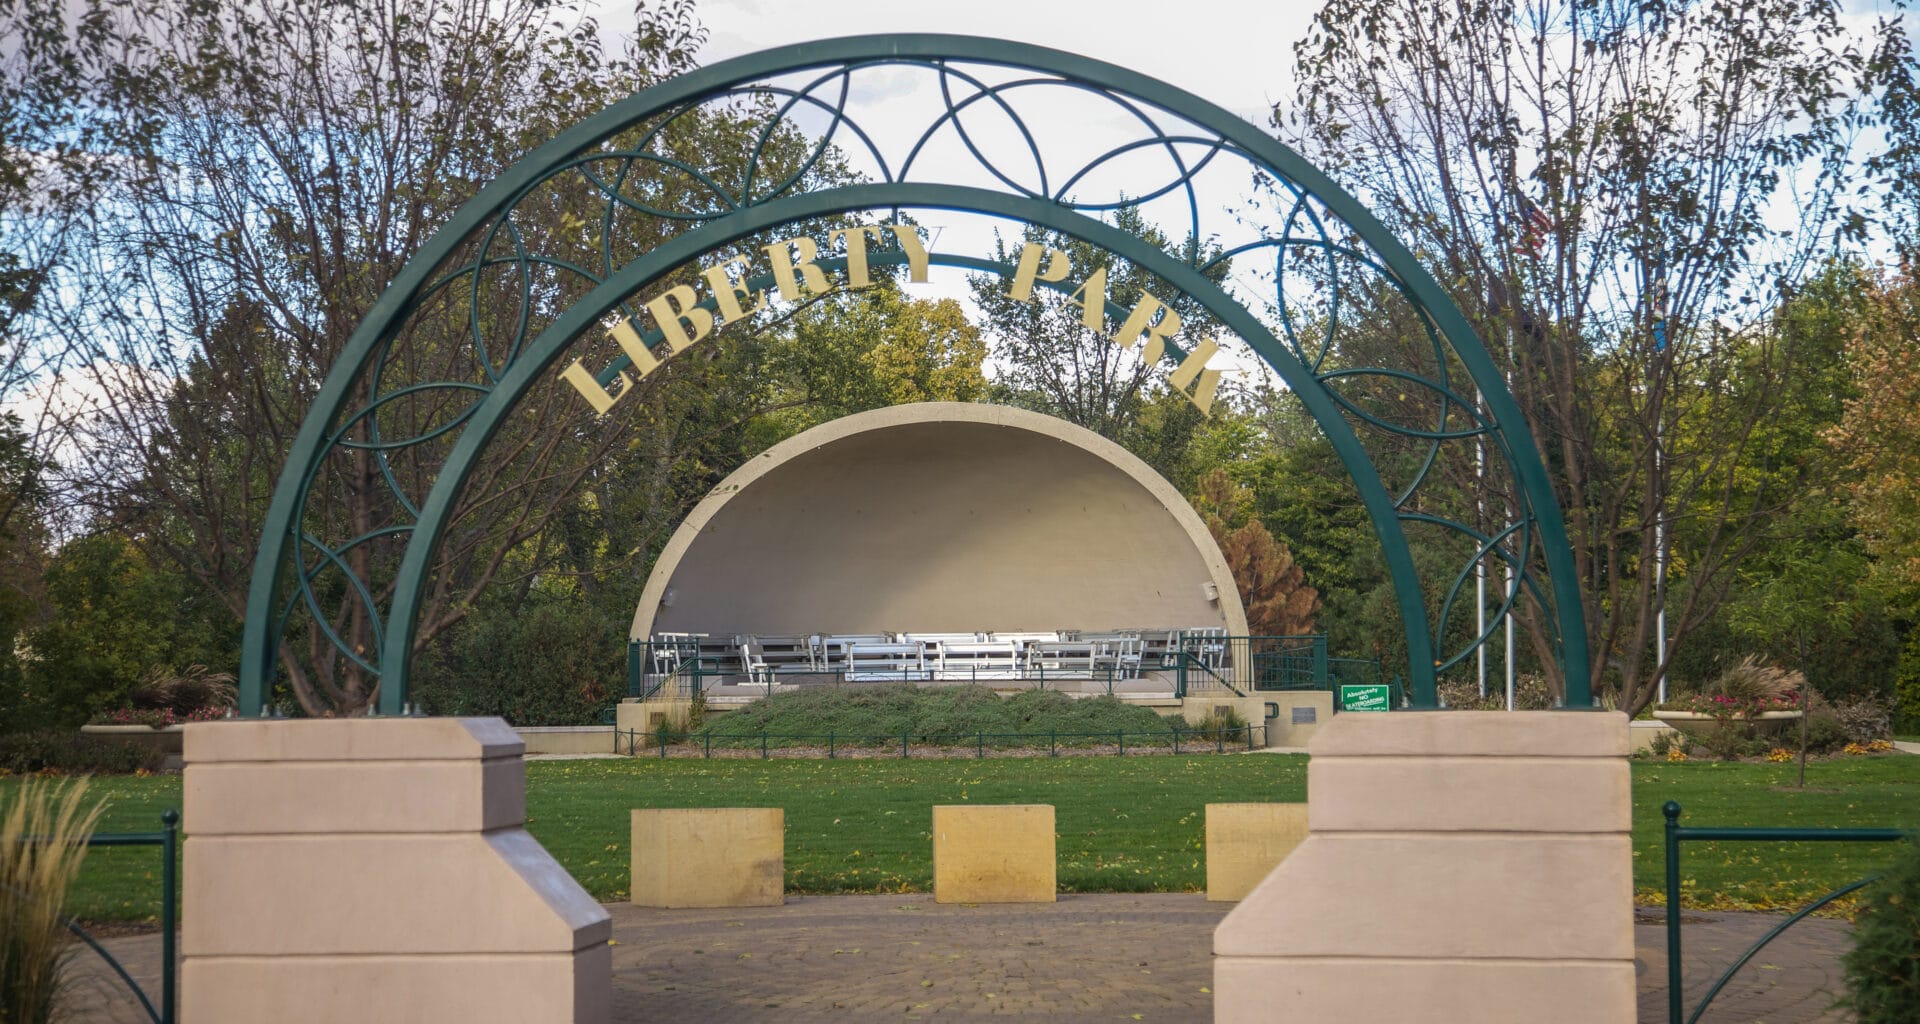 Bandshell in Liberty Park in Marshall MN